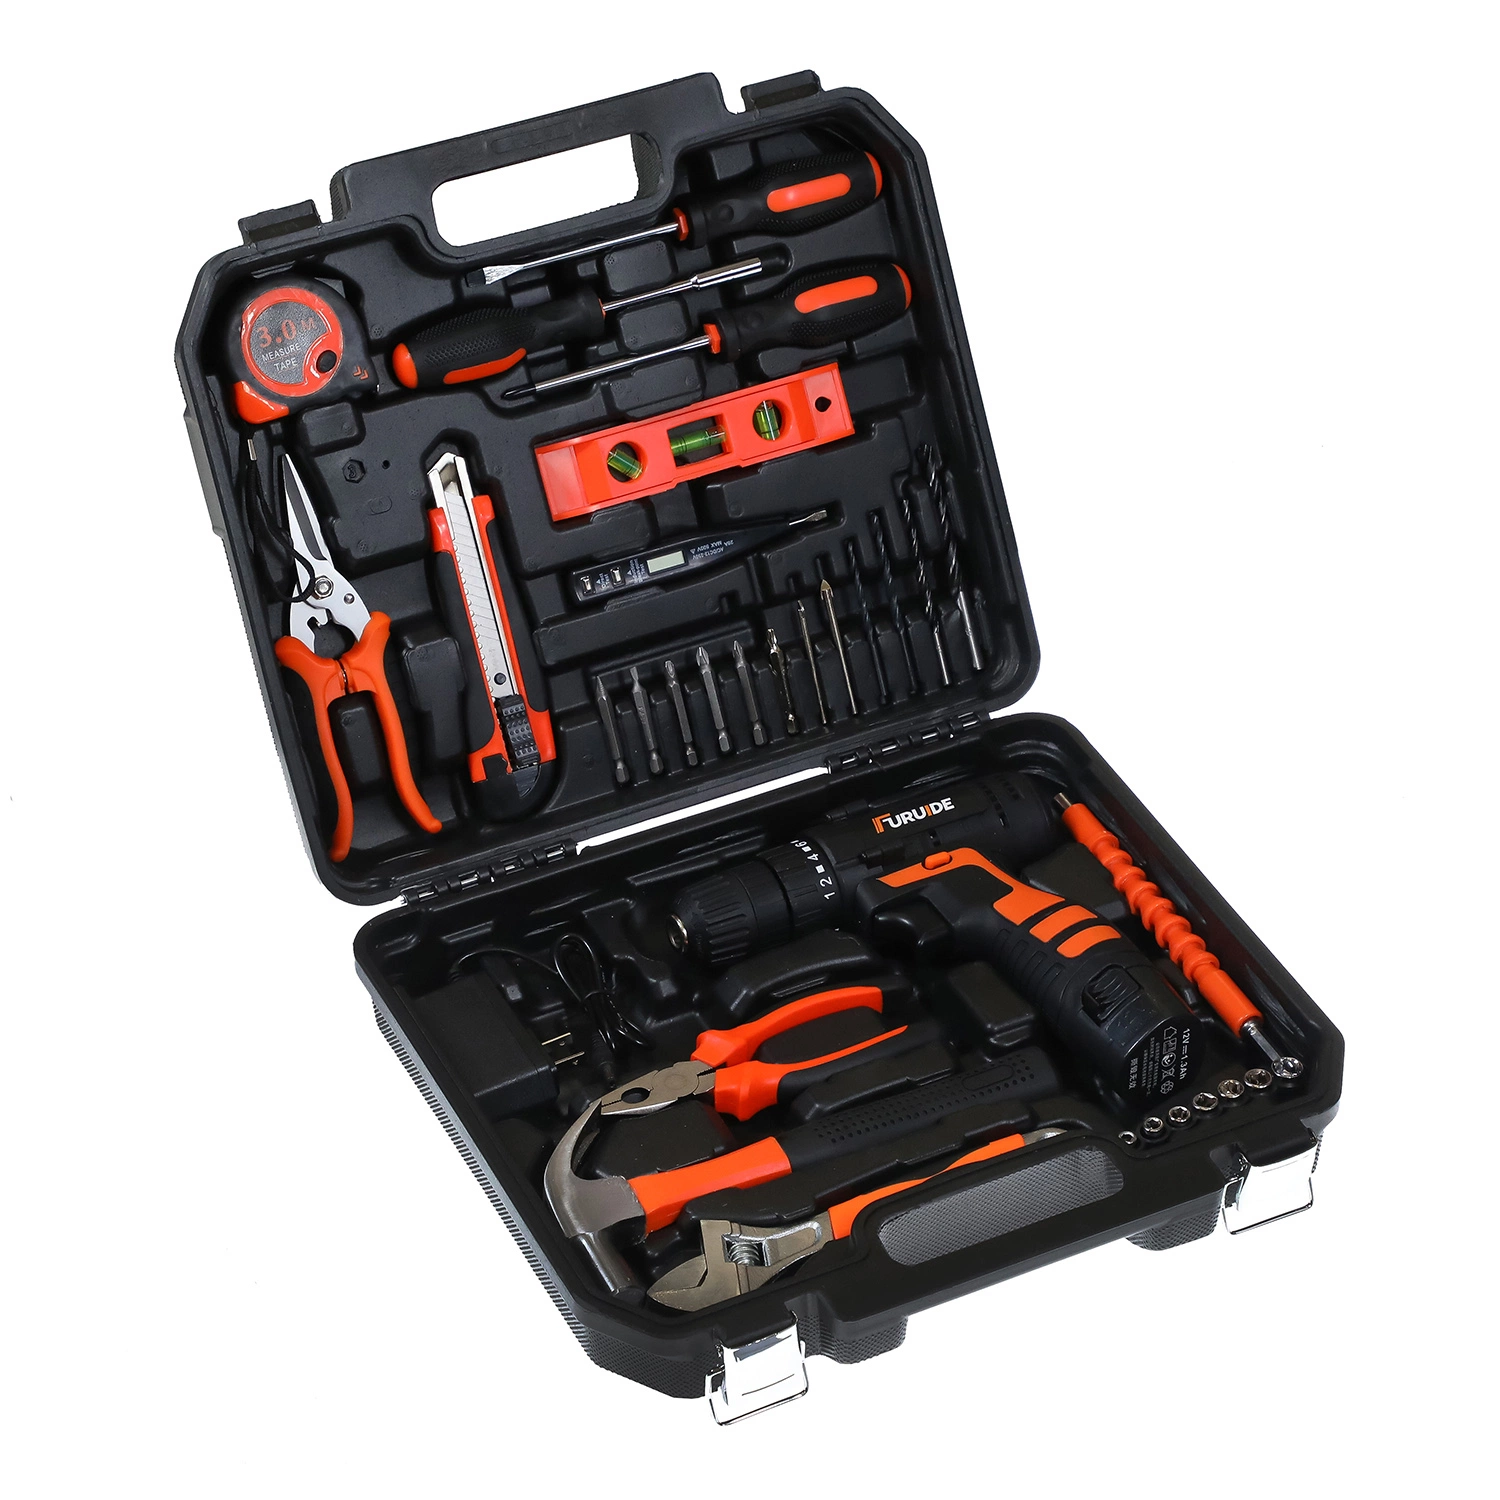 82 Sets Household Tools Multifunctional Hardware Toolbox, Electrician and Woodworking Repair Manual Tool Set Household Tool